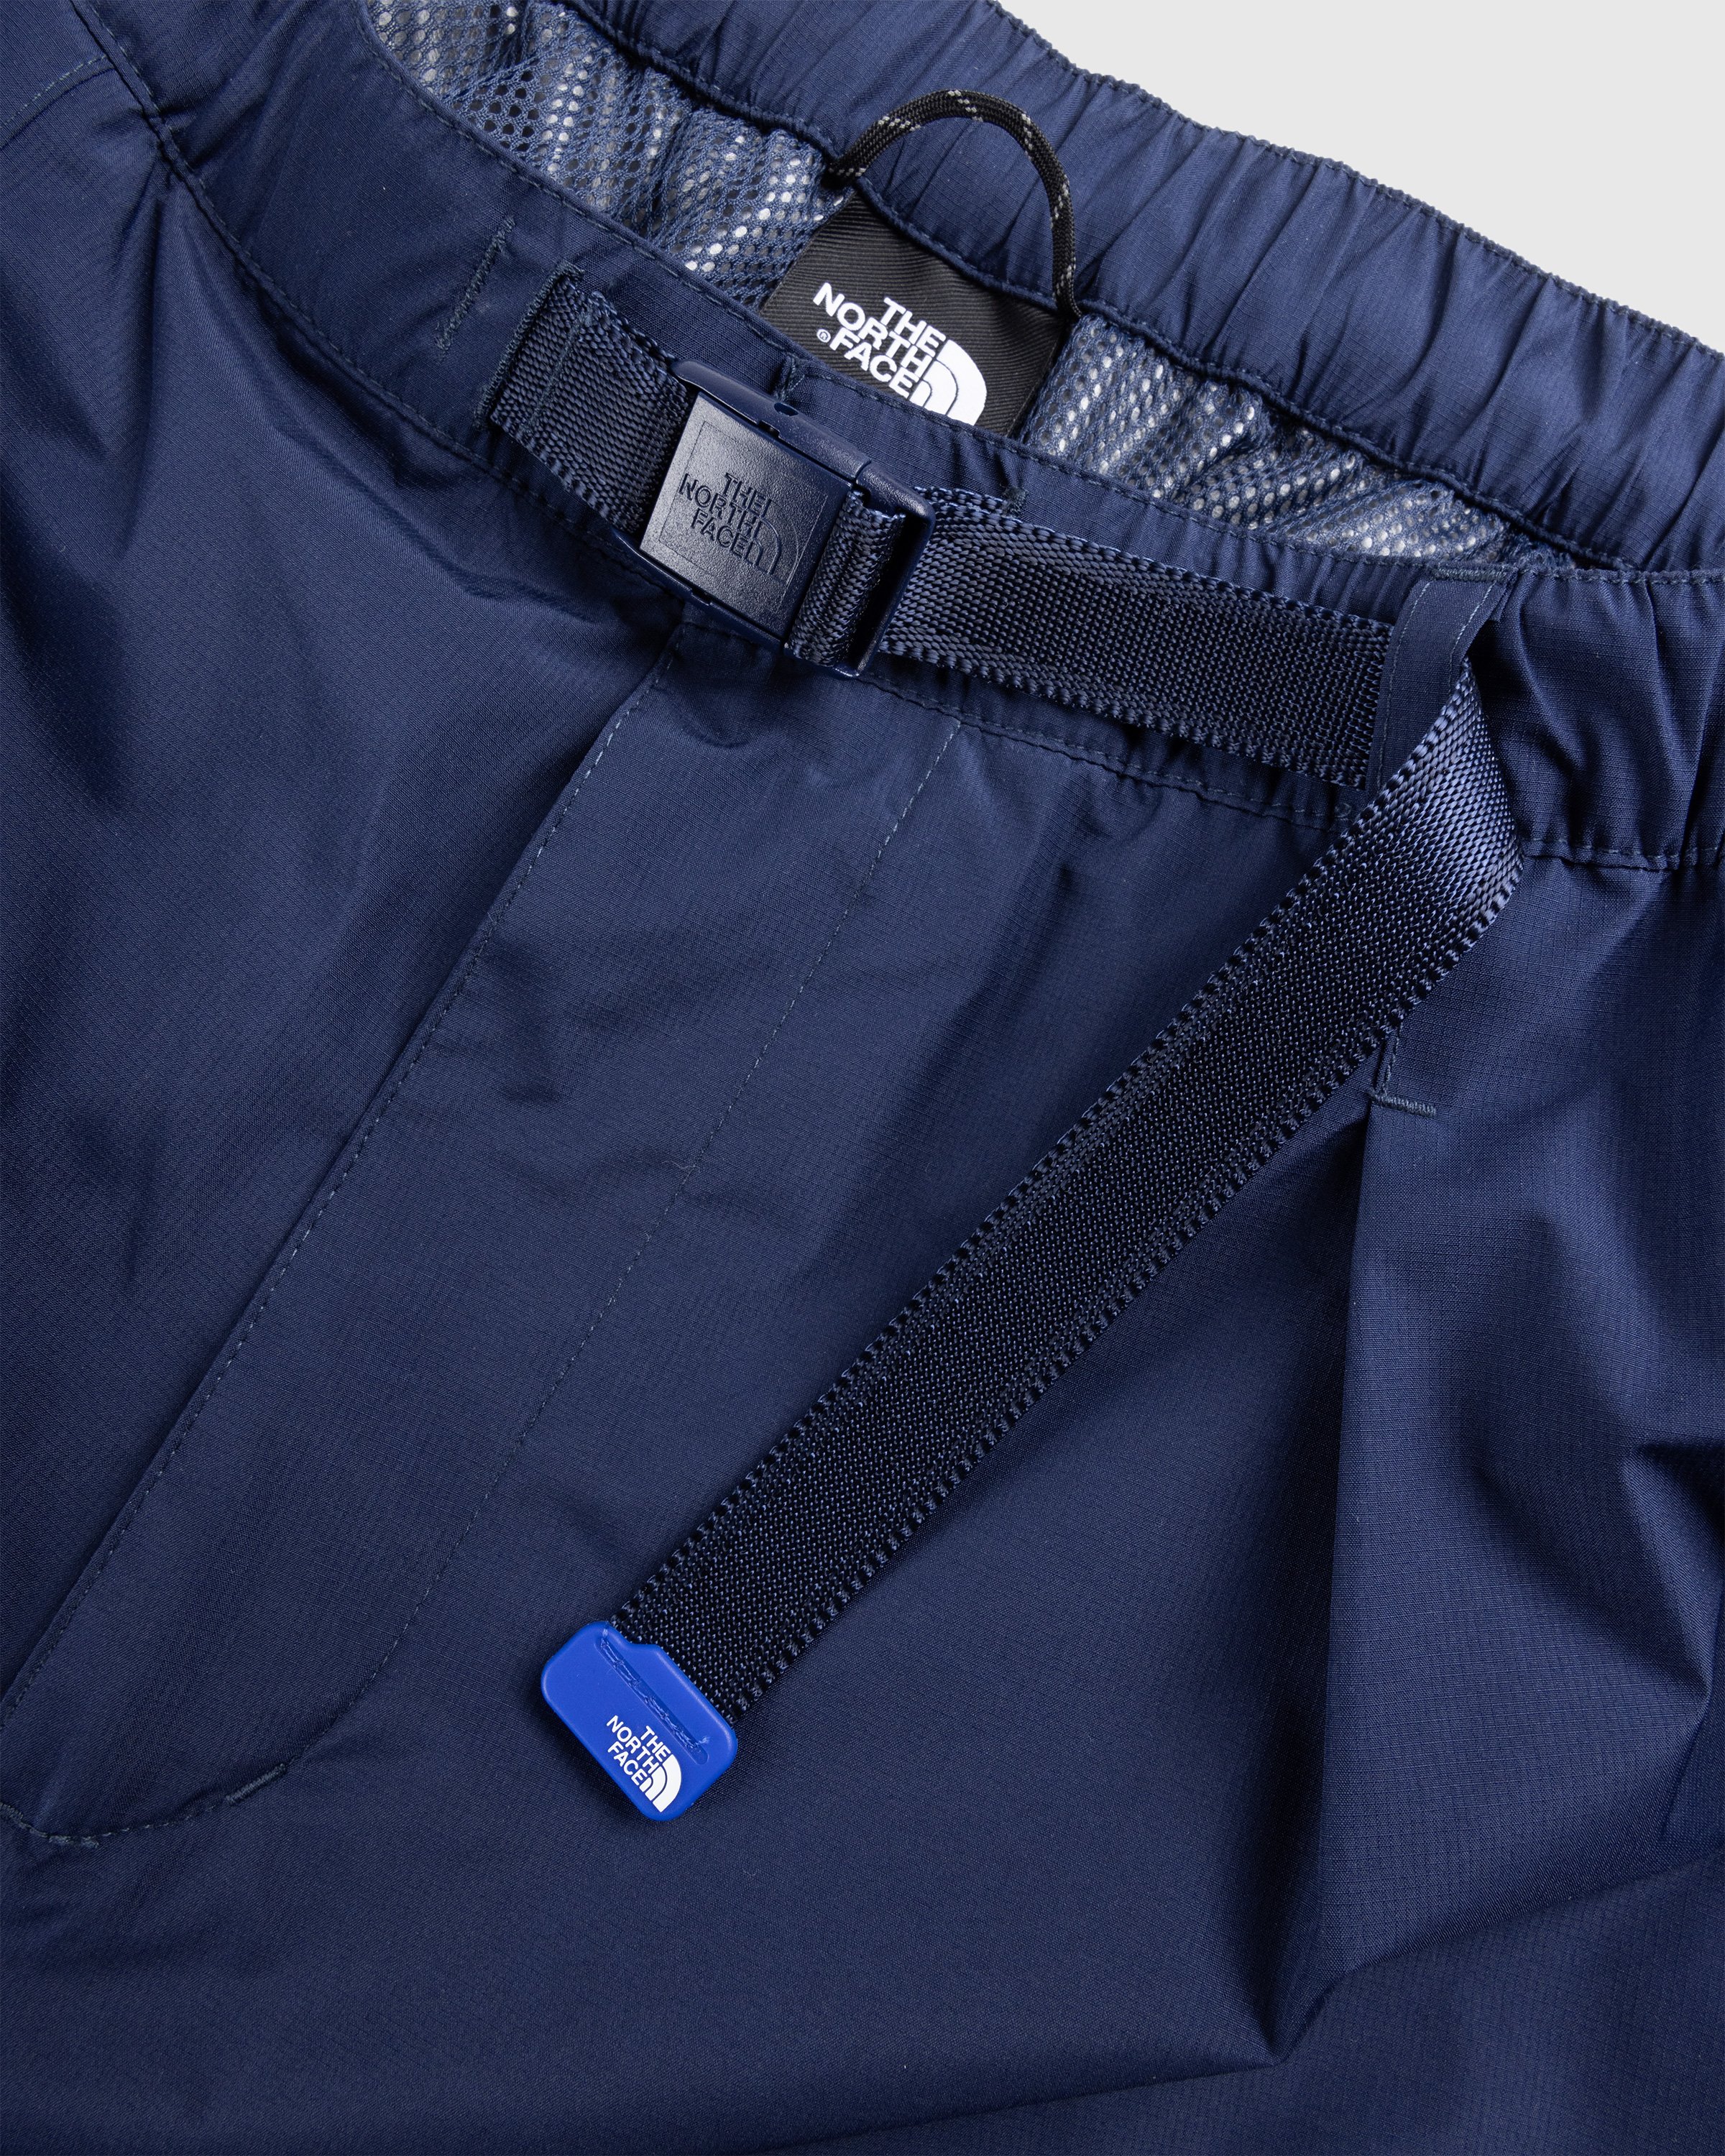 The North Face - M GTX CASUAL PANTS - AP SUMMIT NAVY/TNF BLUE - Clothing - Blue - Image 6